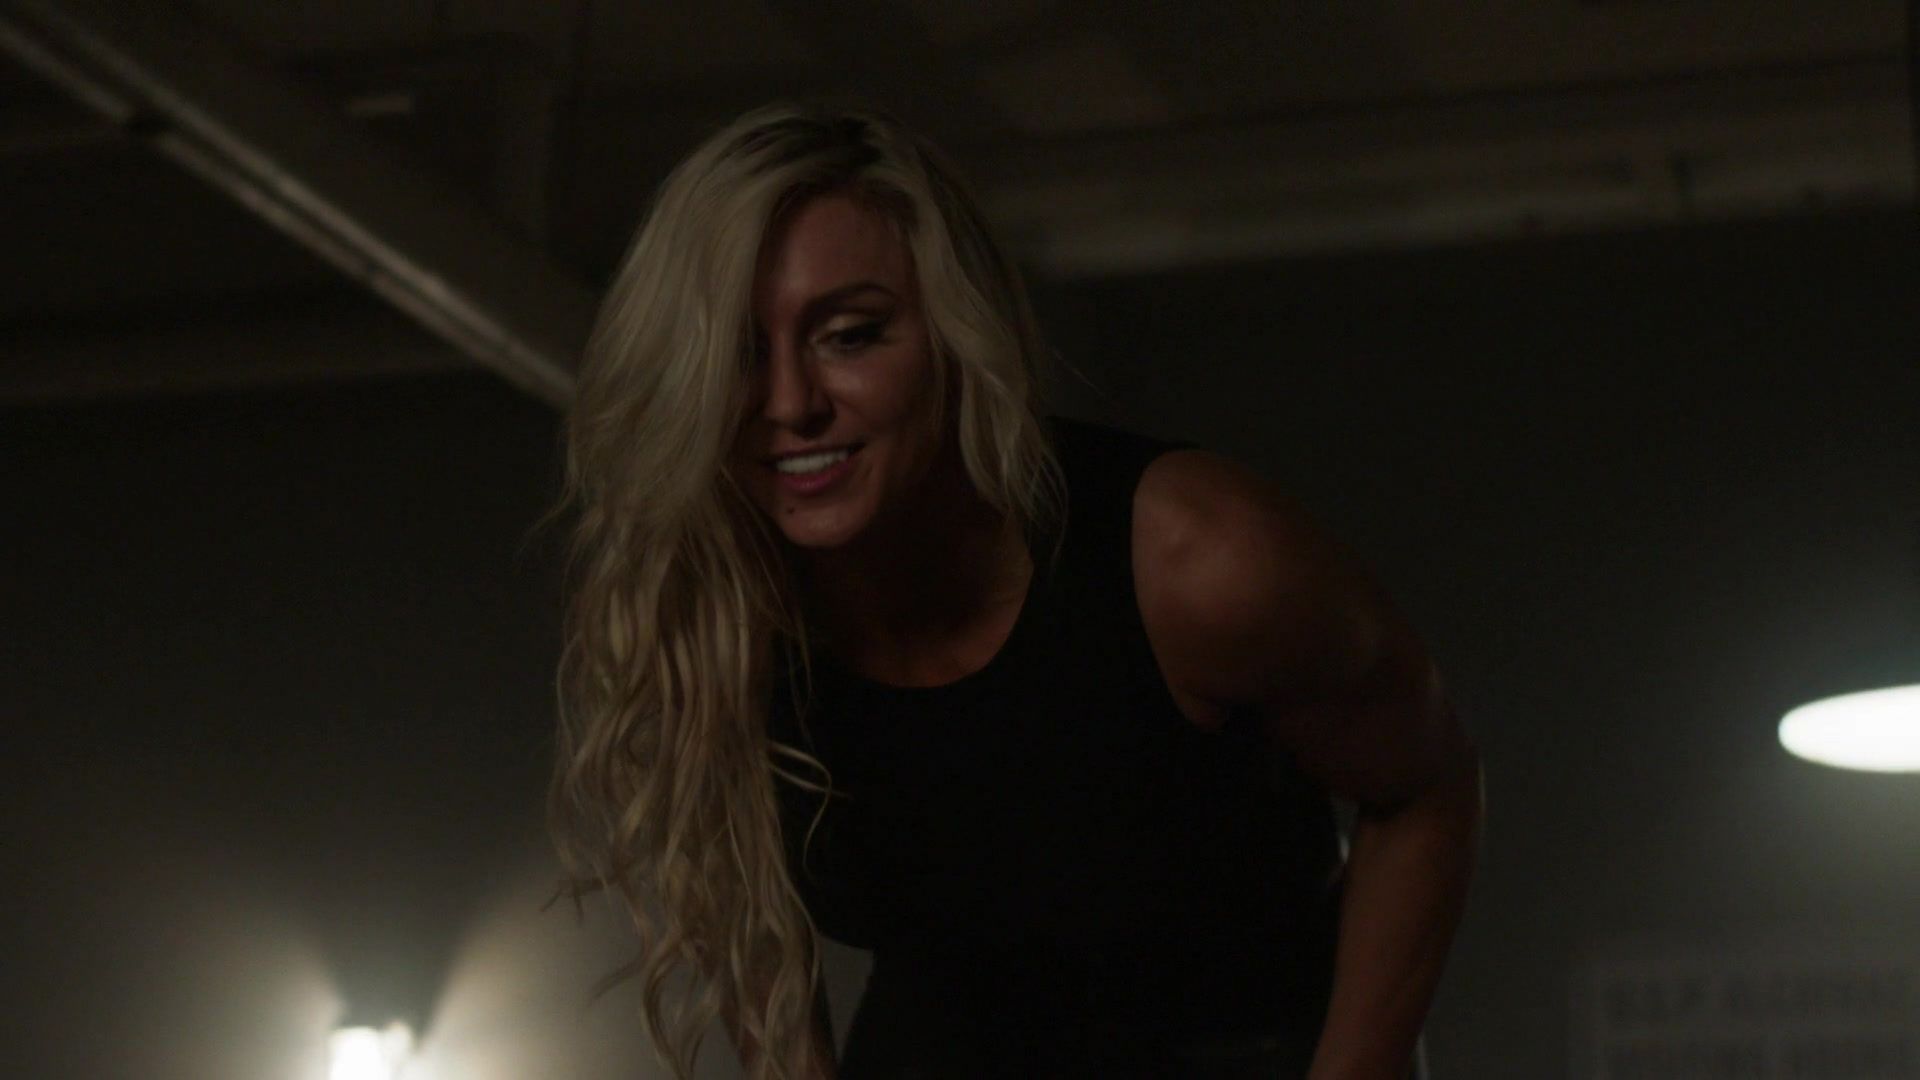 Charlotte Flair made her acting debut in 2017